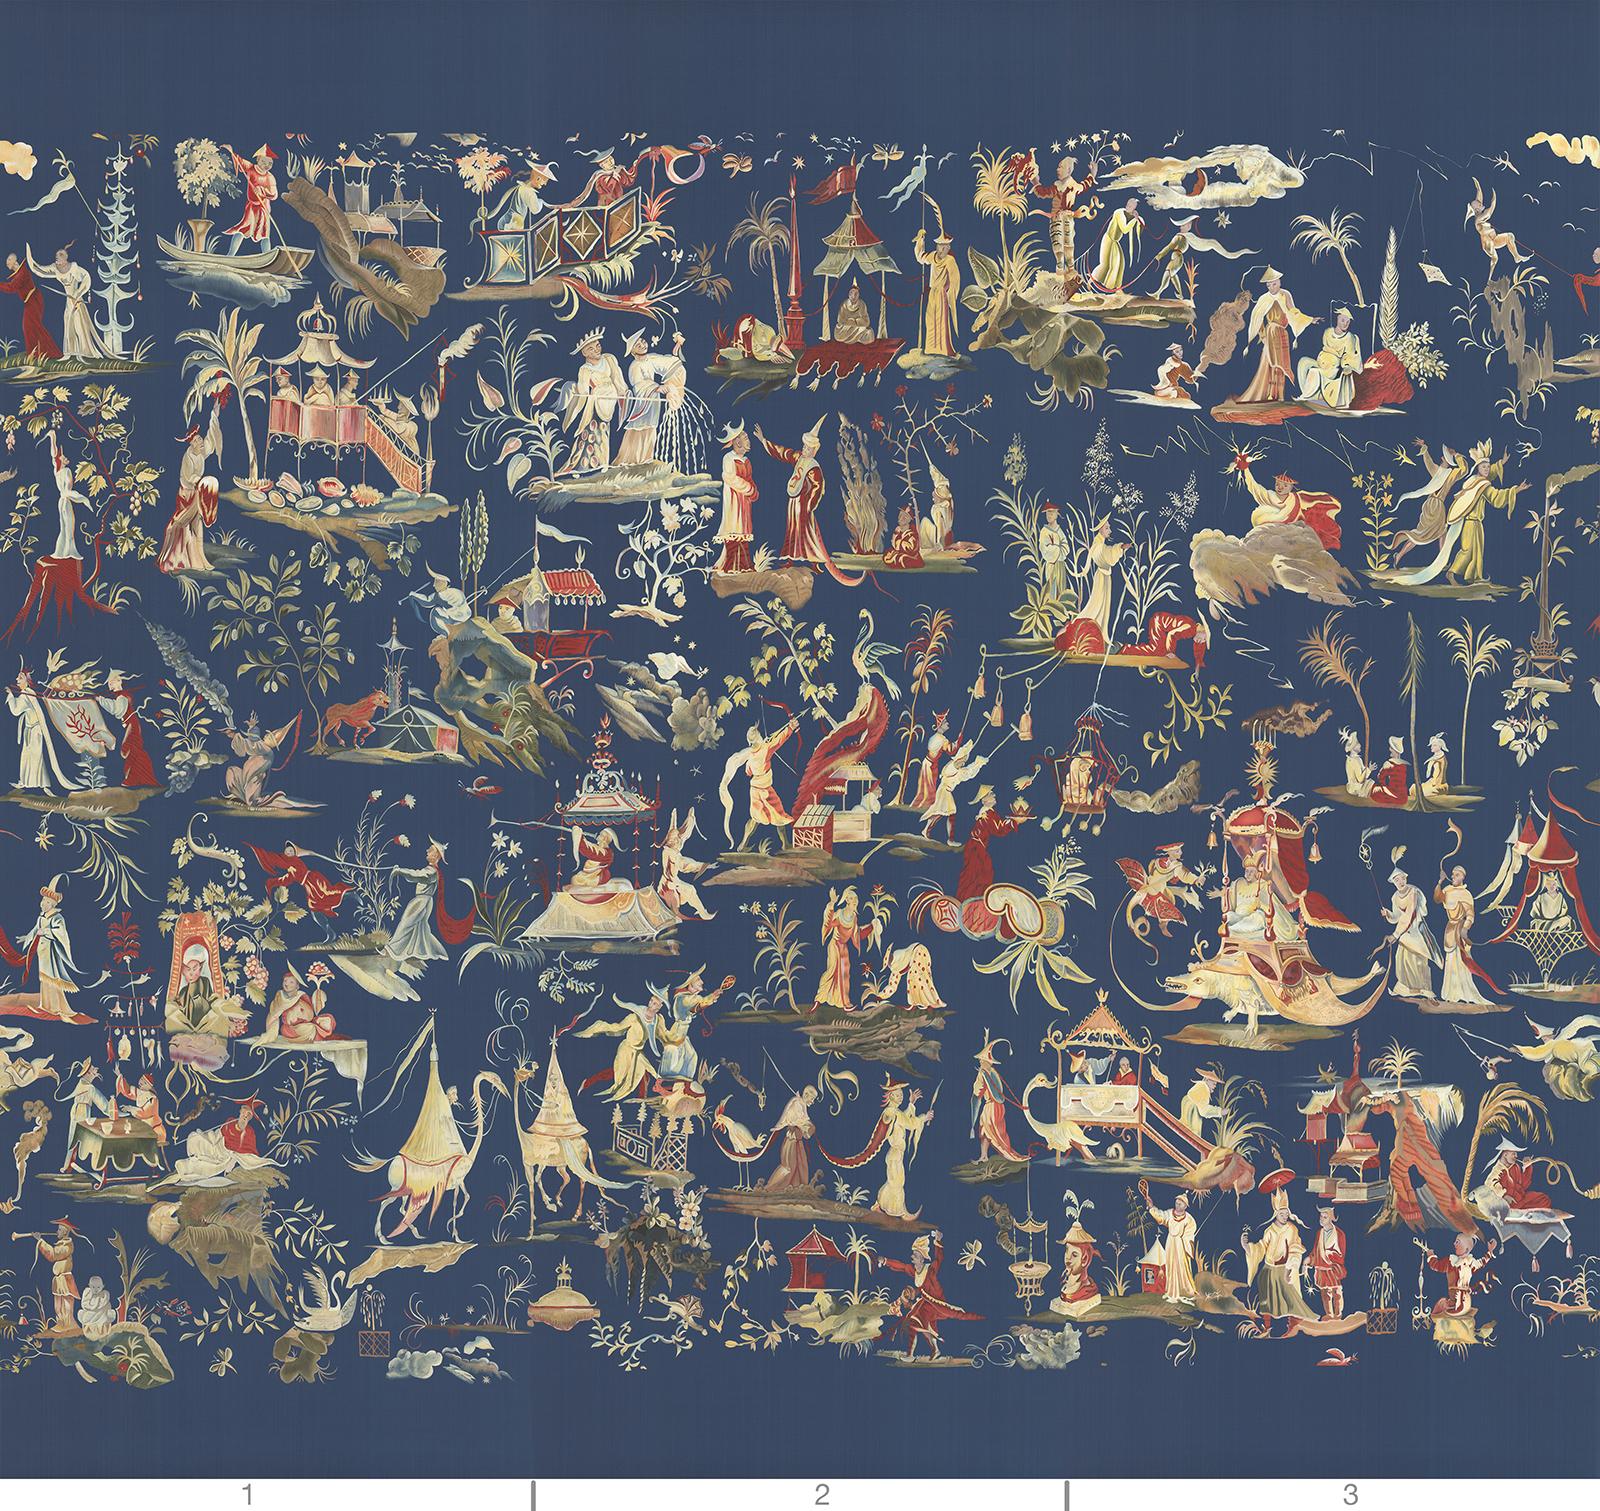 Brussels Tapestry is a mural of three separate panels hand painted on a silk blue background.  Each panel consists of a collage of vignettes with figures, animals, boats, and towers.  This delight of fantasy is full of unusual creatures, robed